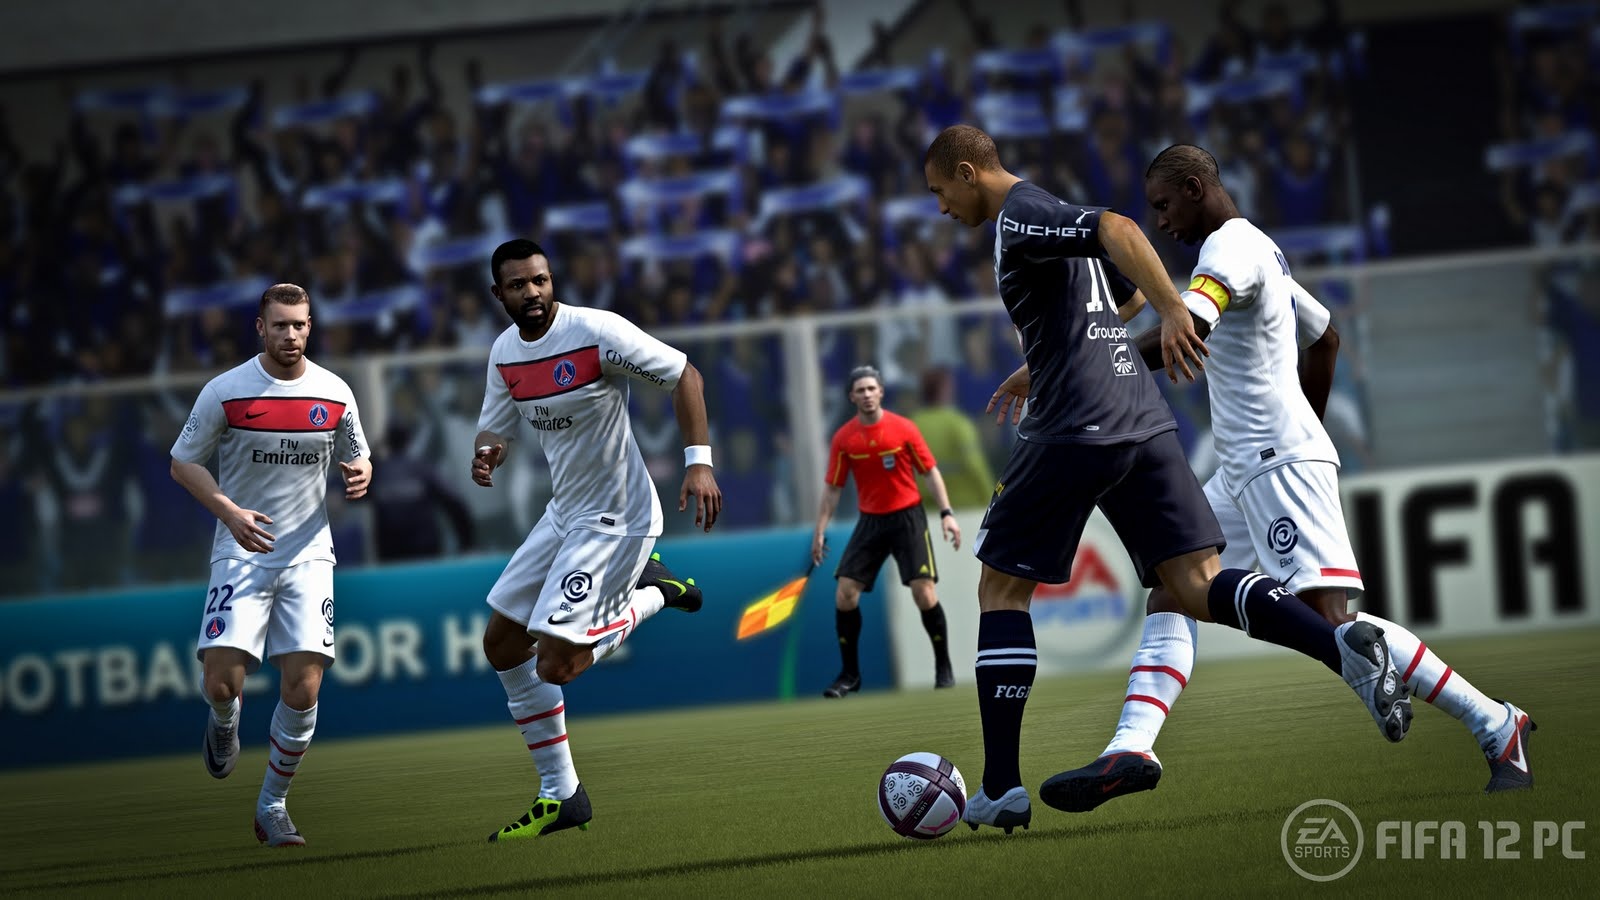 Ea Sports Fifa 12 Full Version Free Download For Android